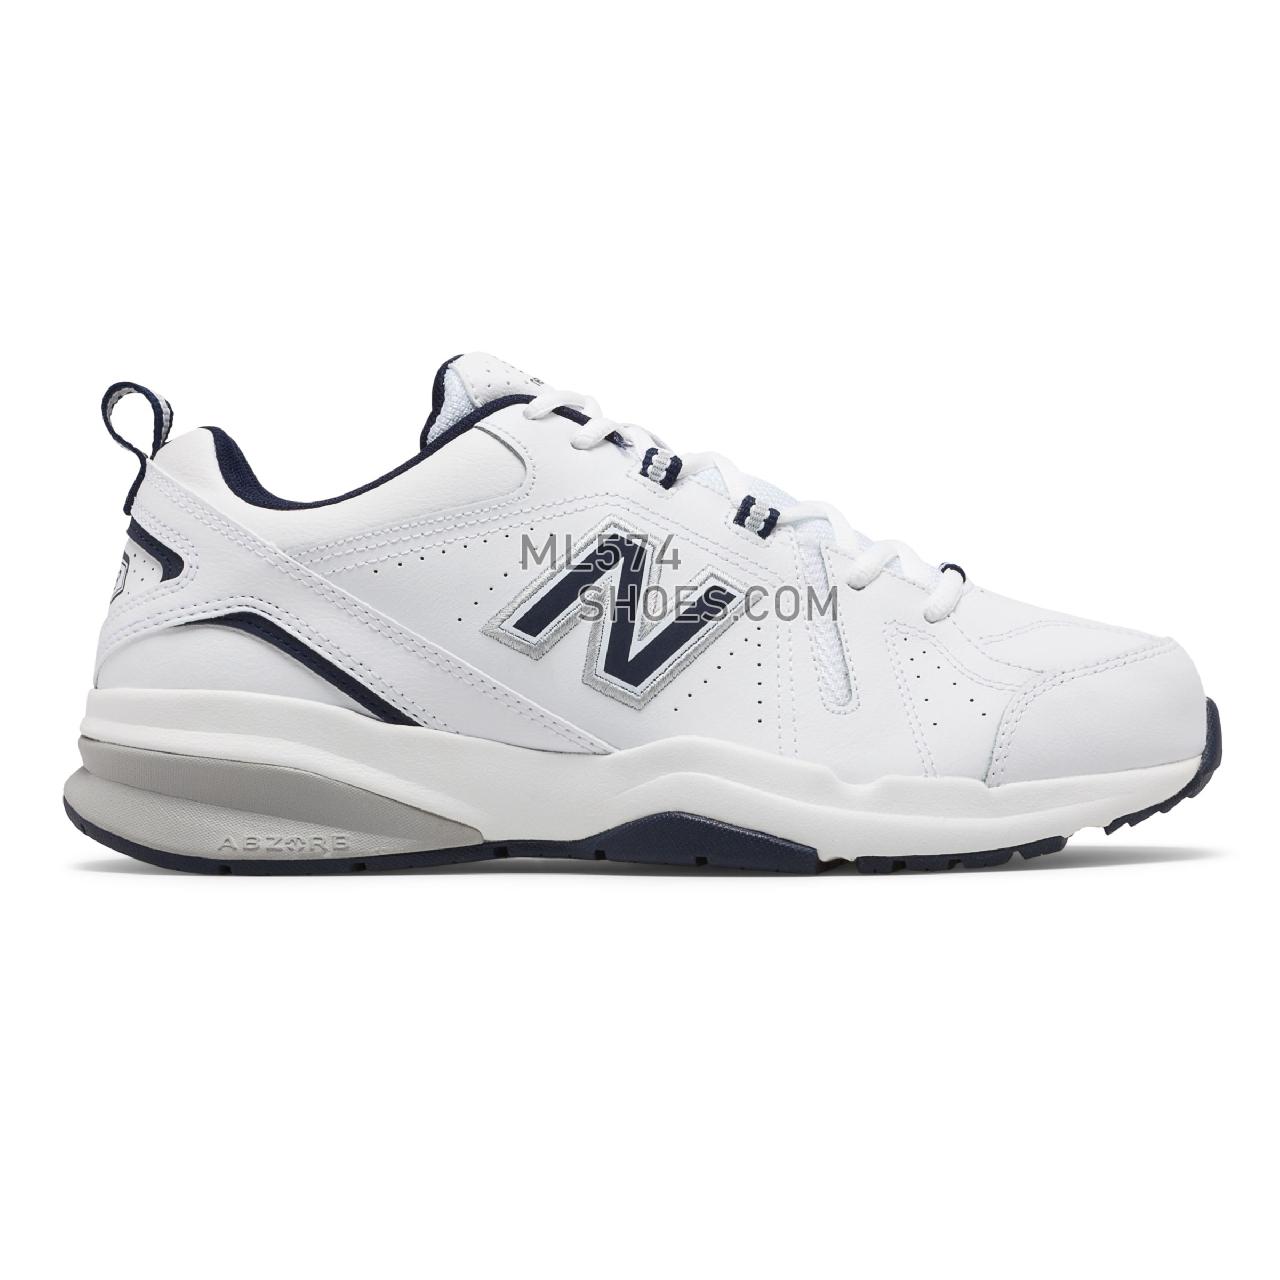 New Balance 608v5 - Men's Everyday Trainers - White with Navy - MX608WN5